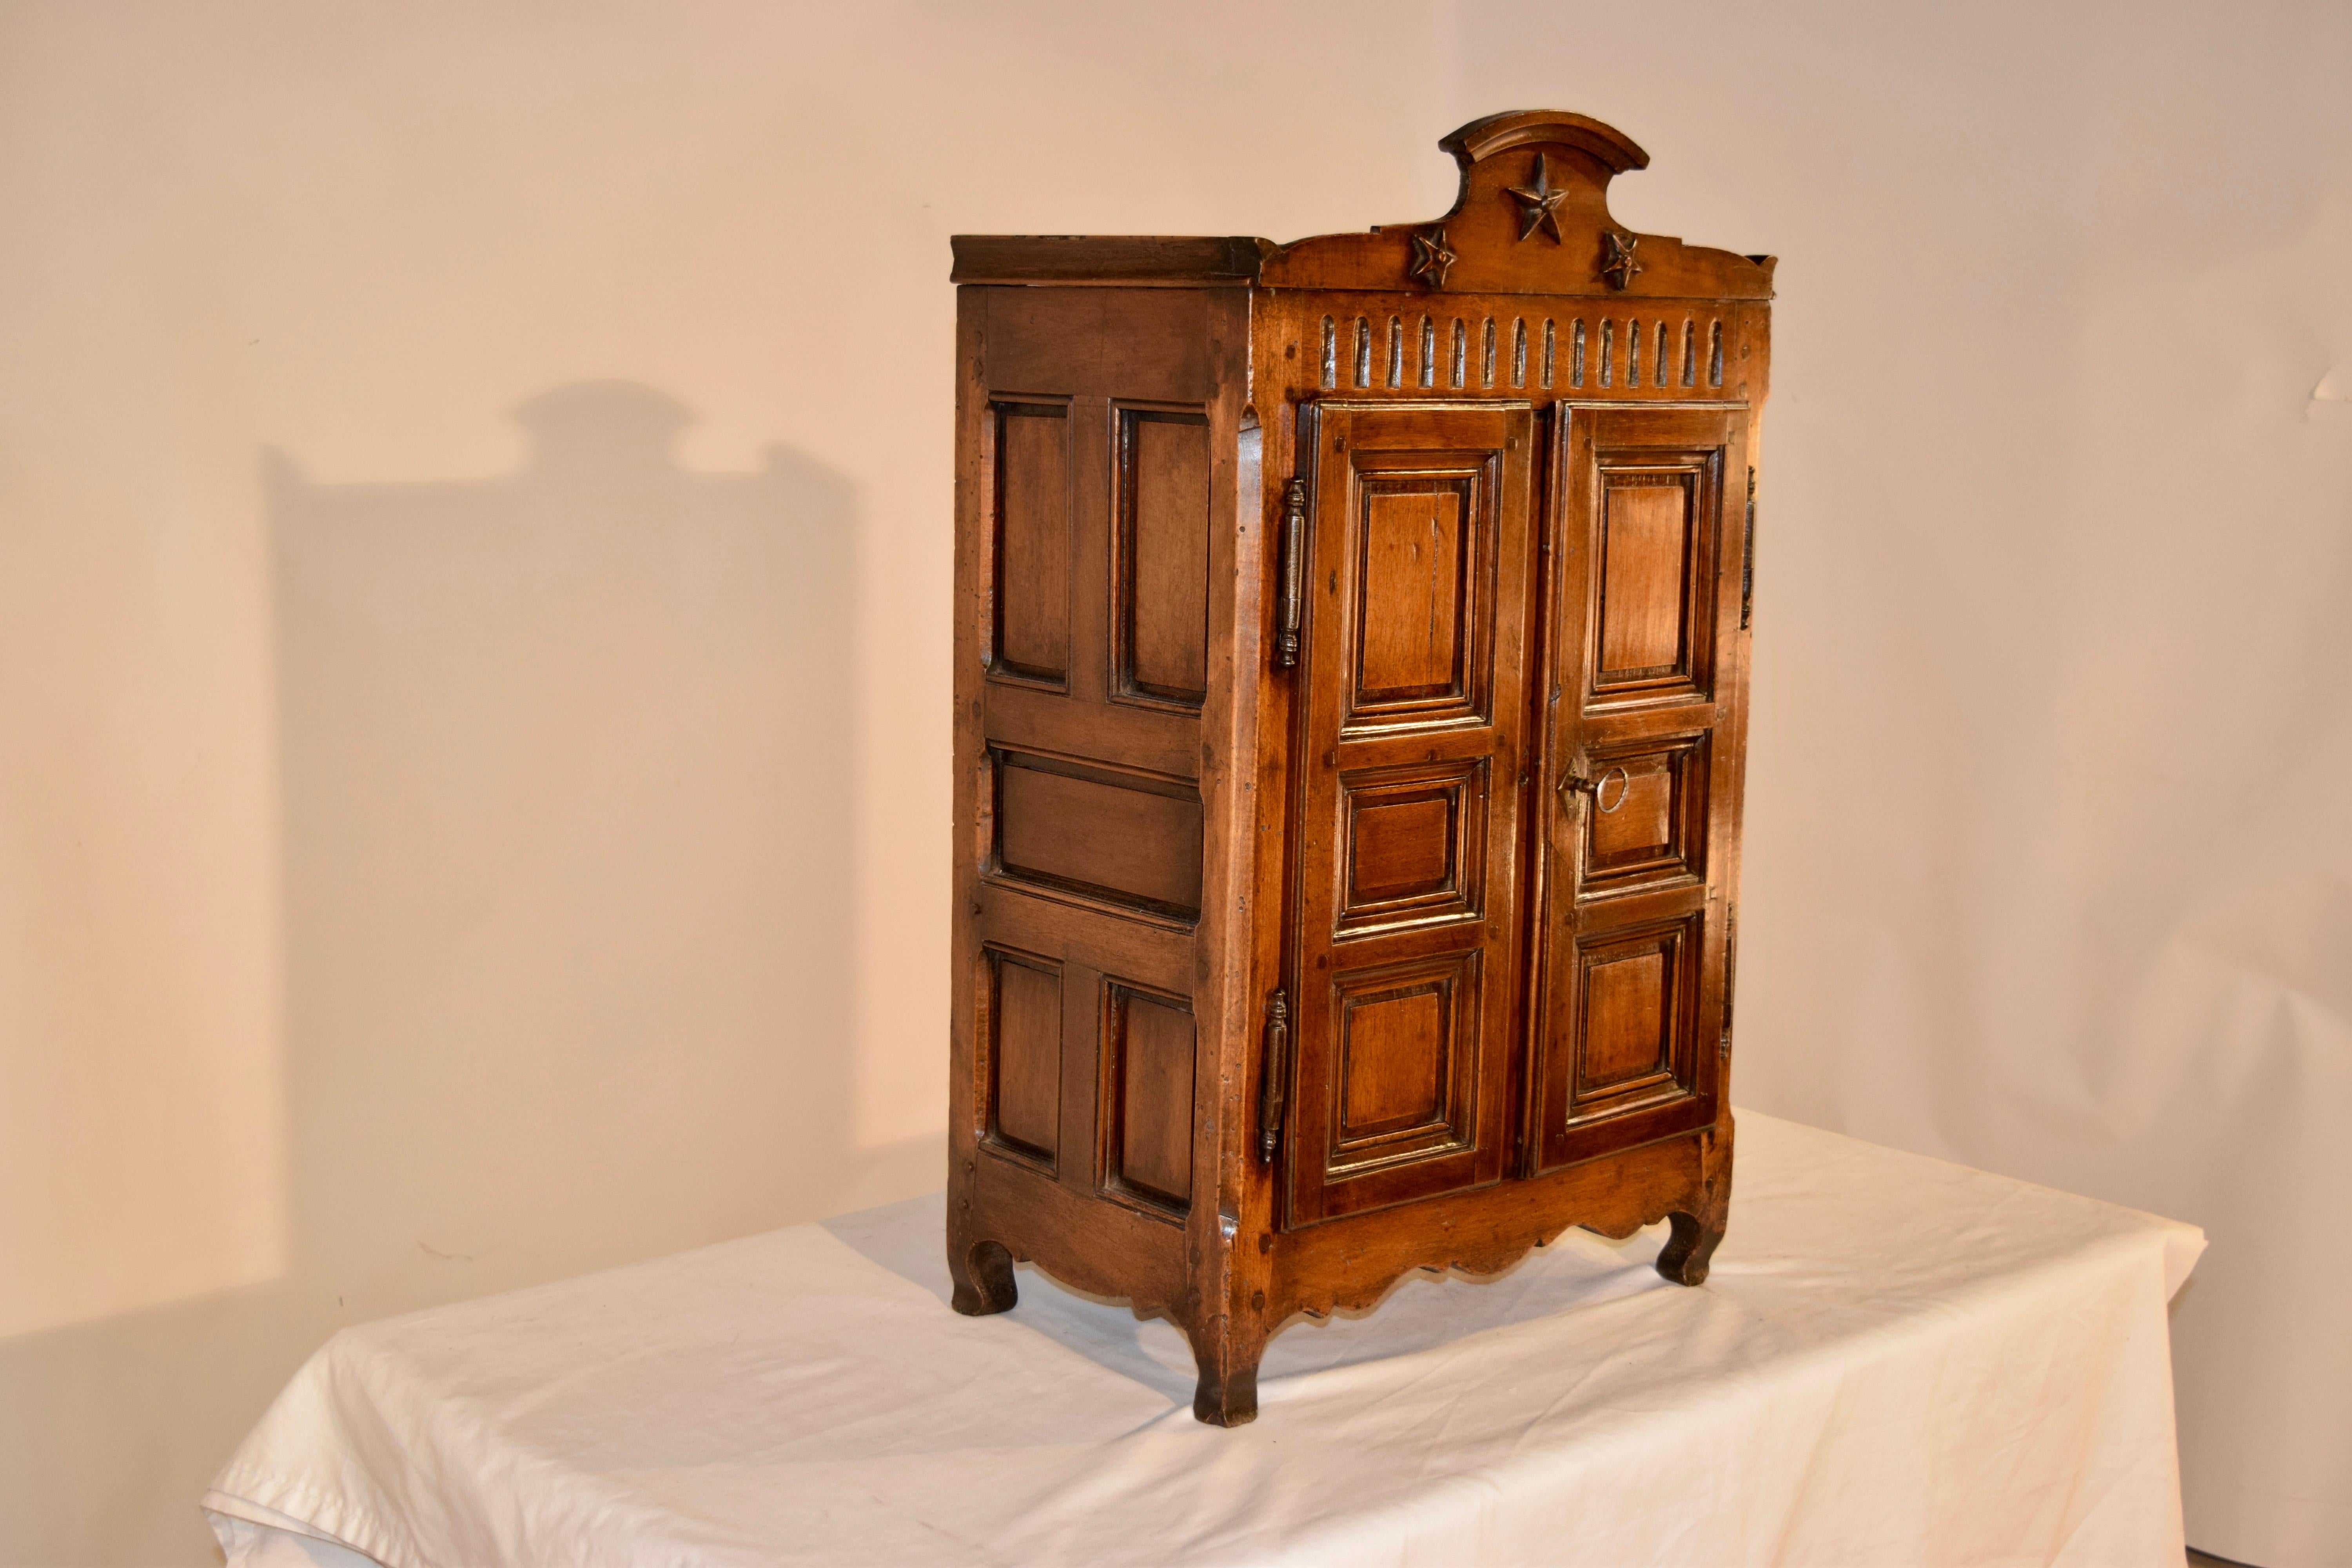 19th century chestnut miniature armoire from France. This is a wonderful piece of craftmanship, with a lovely crown following down to a case which is entirely raised panelled and pegged in construction. The doors open to reveal a finished interior